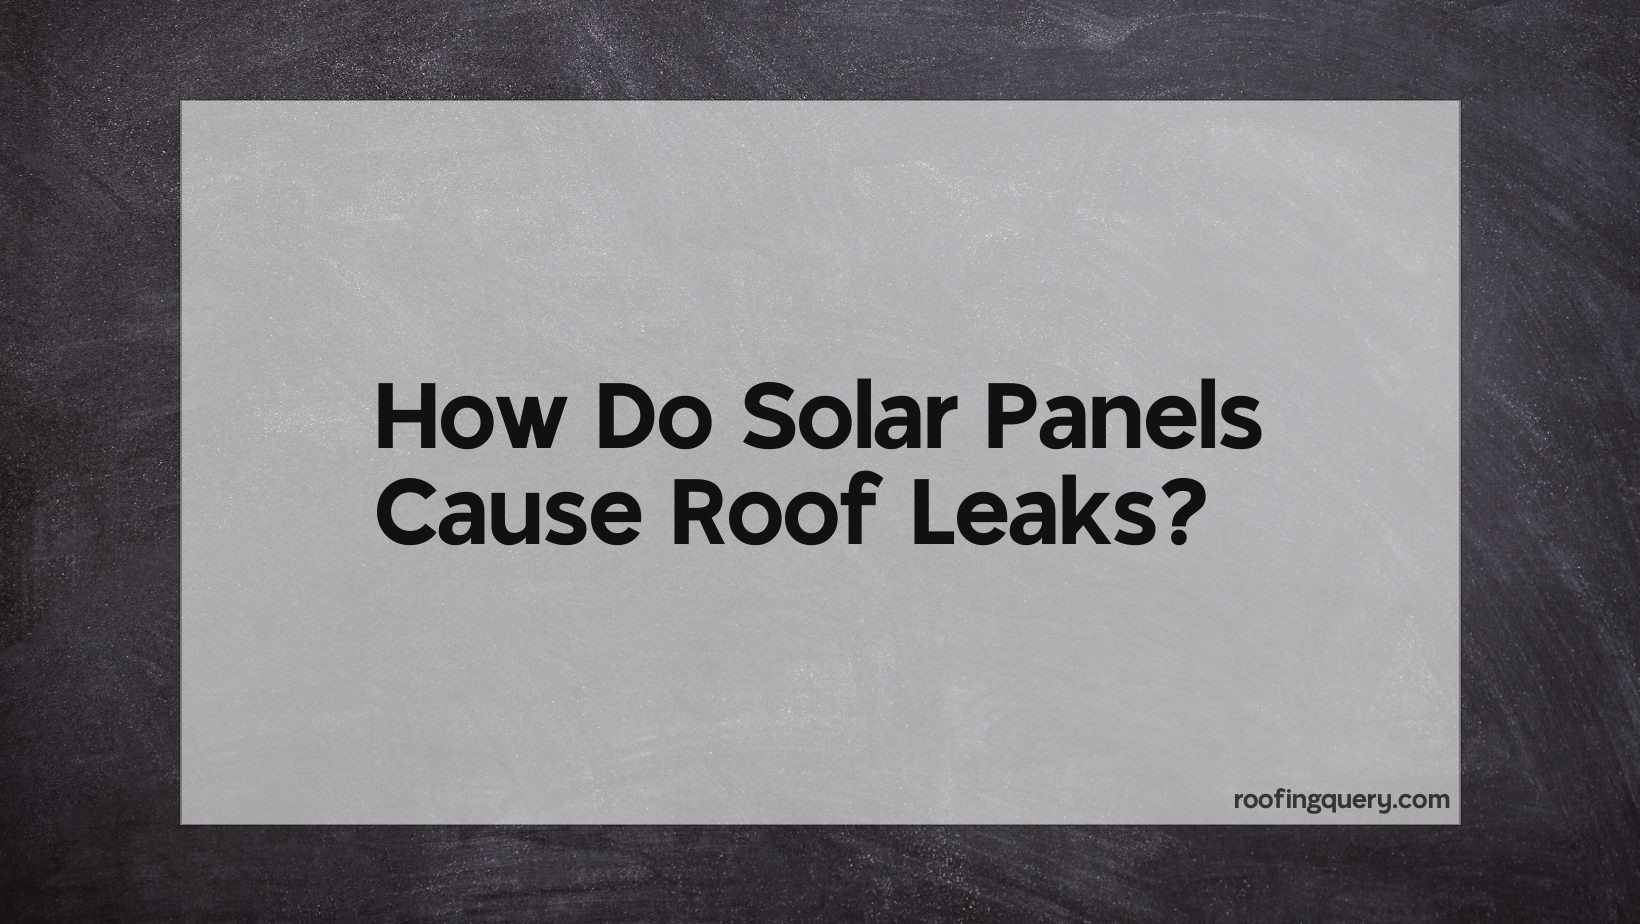 How Do Solar Panels Cause Roof Leaks?